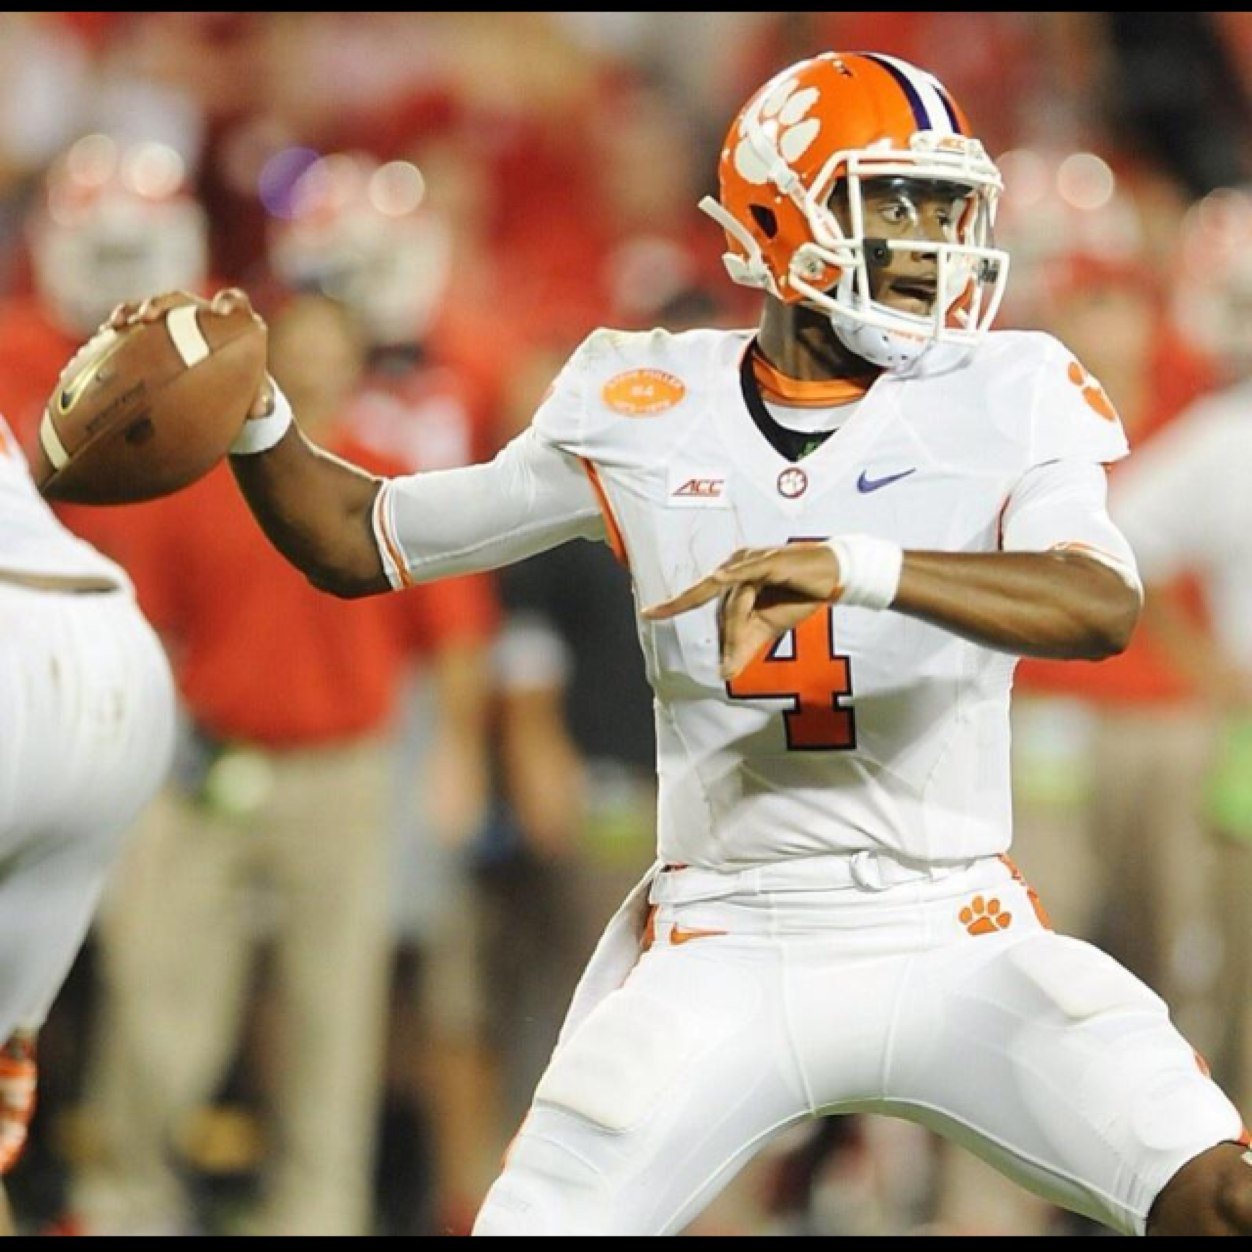 Clemson football news, analysis, and hype talk: all right here.